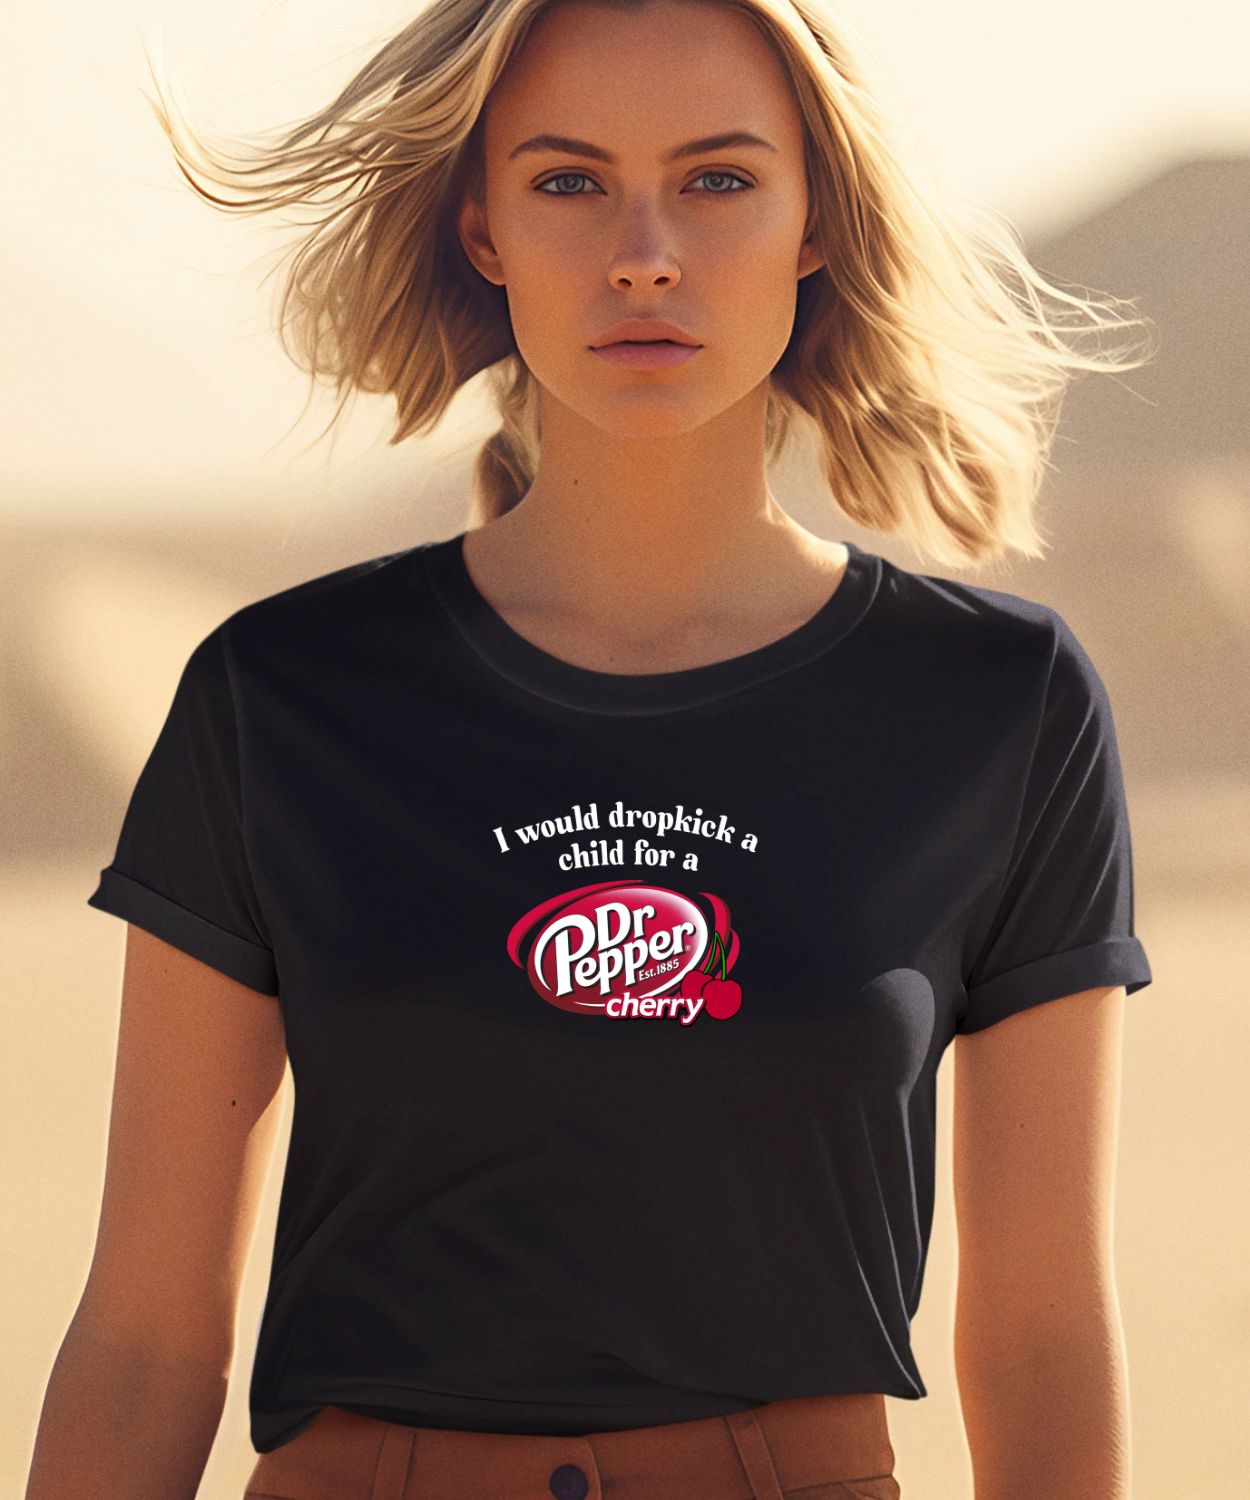 Unethicalthreads I Would Dropkick A Child For A Dr. Pepper Cherry Shirt